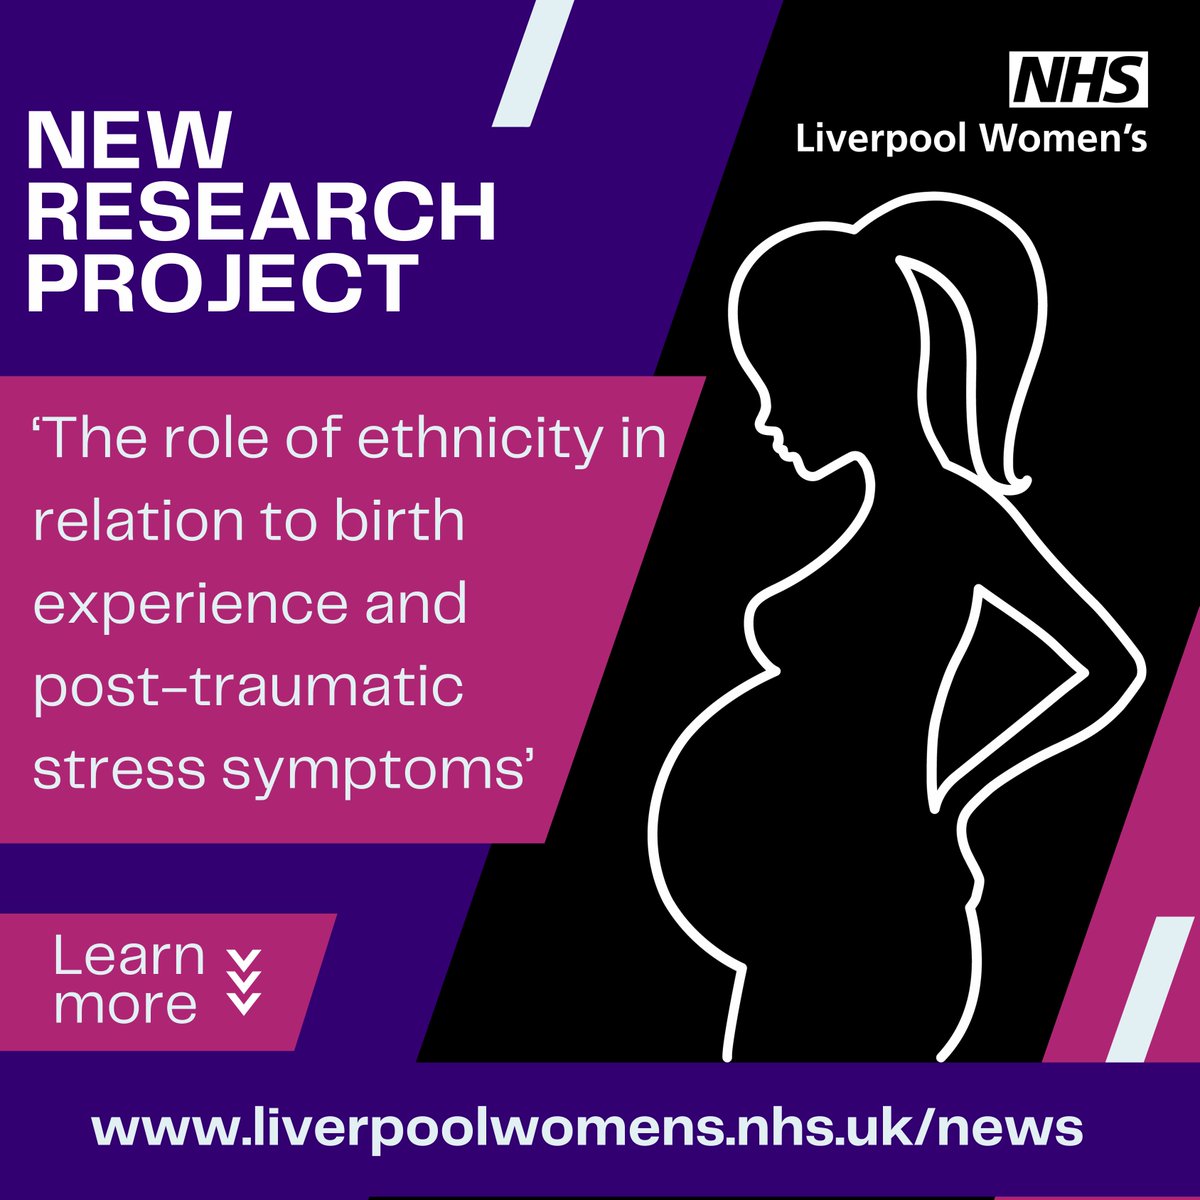 New Research Study - 'The role of ethnicity in relation to birth experience and post-traumatic stress symptoms’ For more information, follow the link on the poster and to sign up click the below: orlo.uk/NRre1